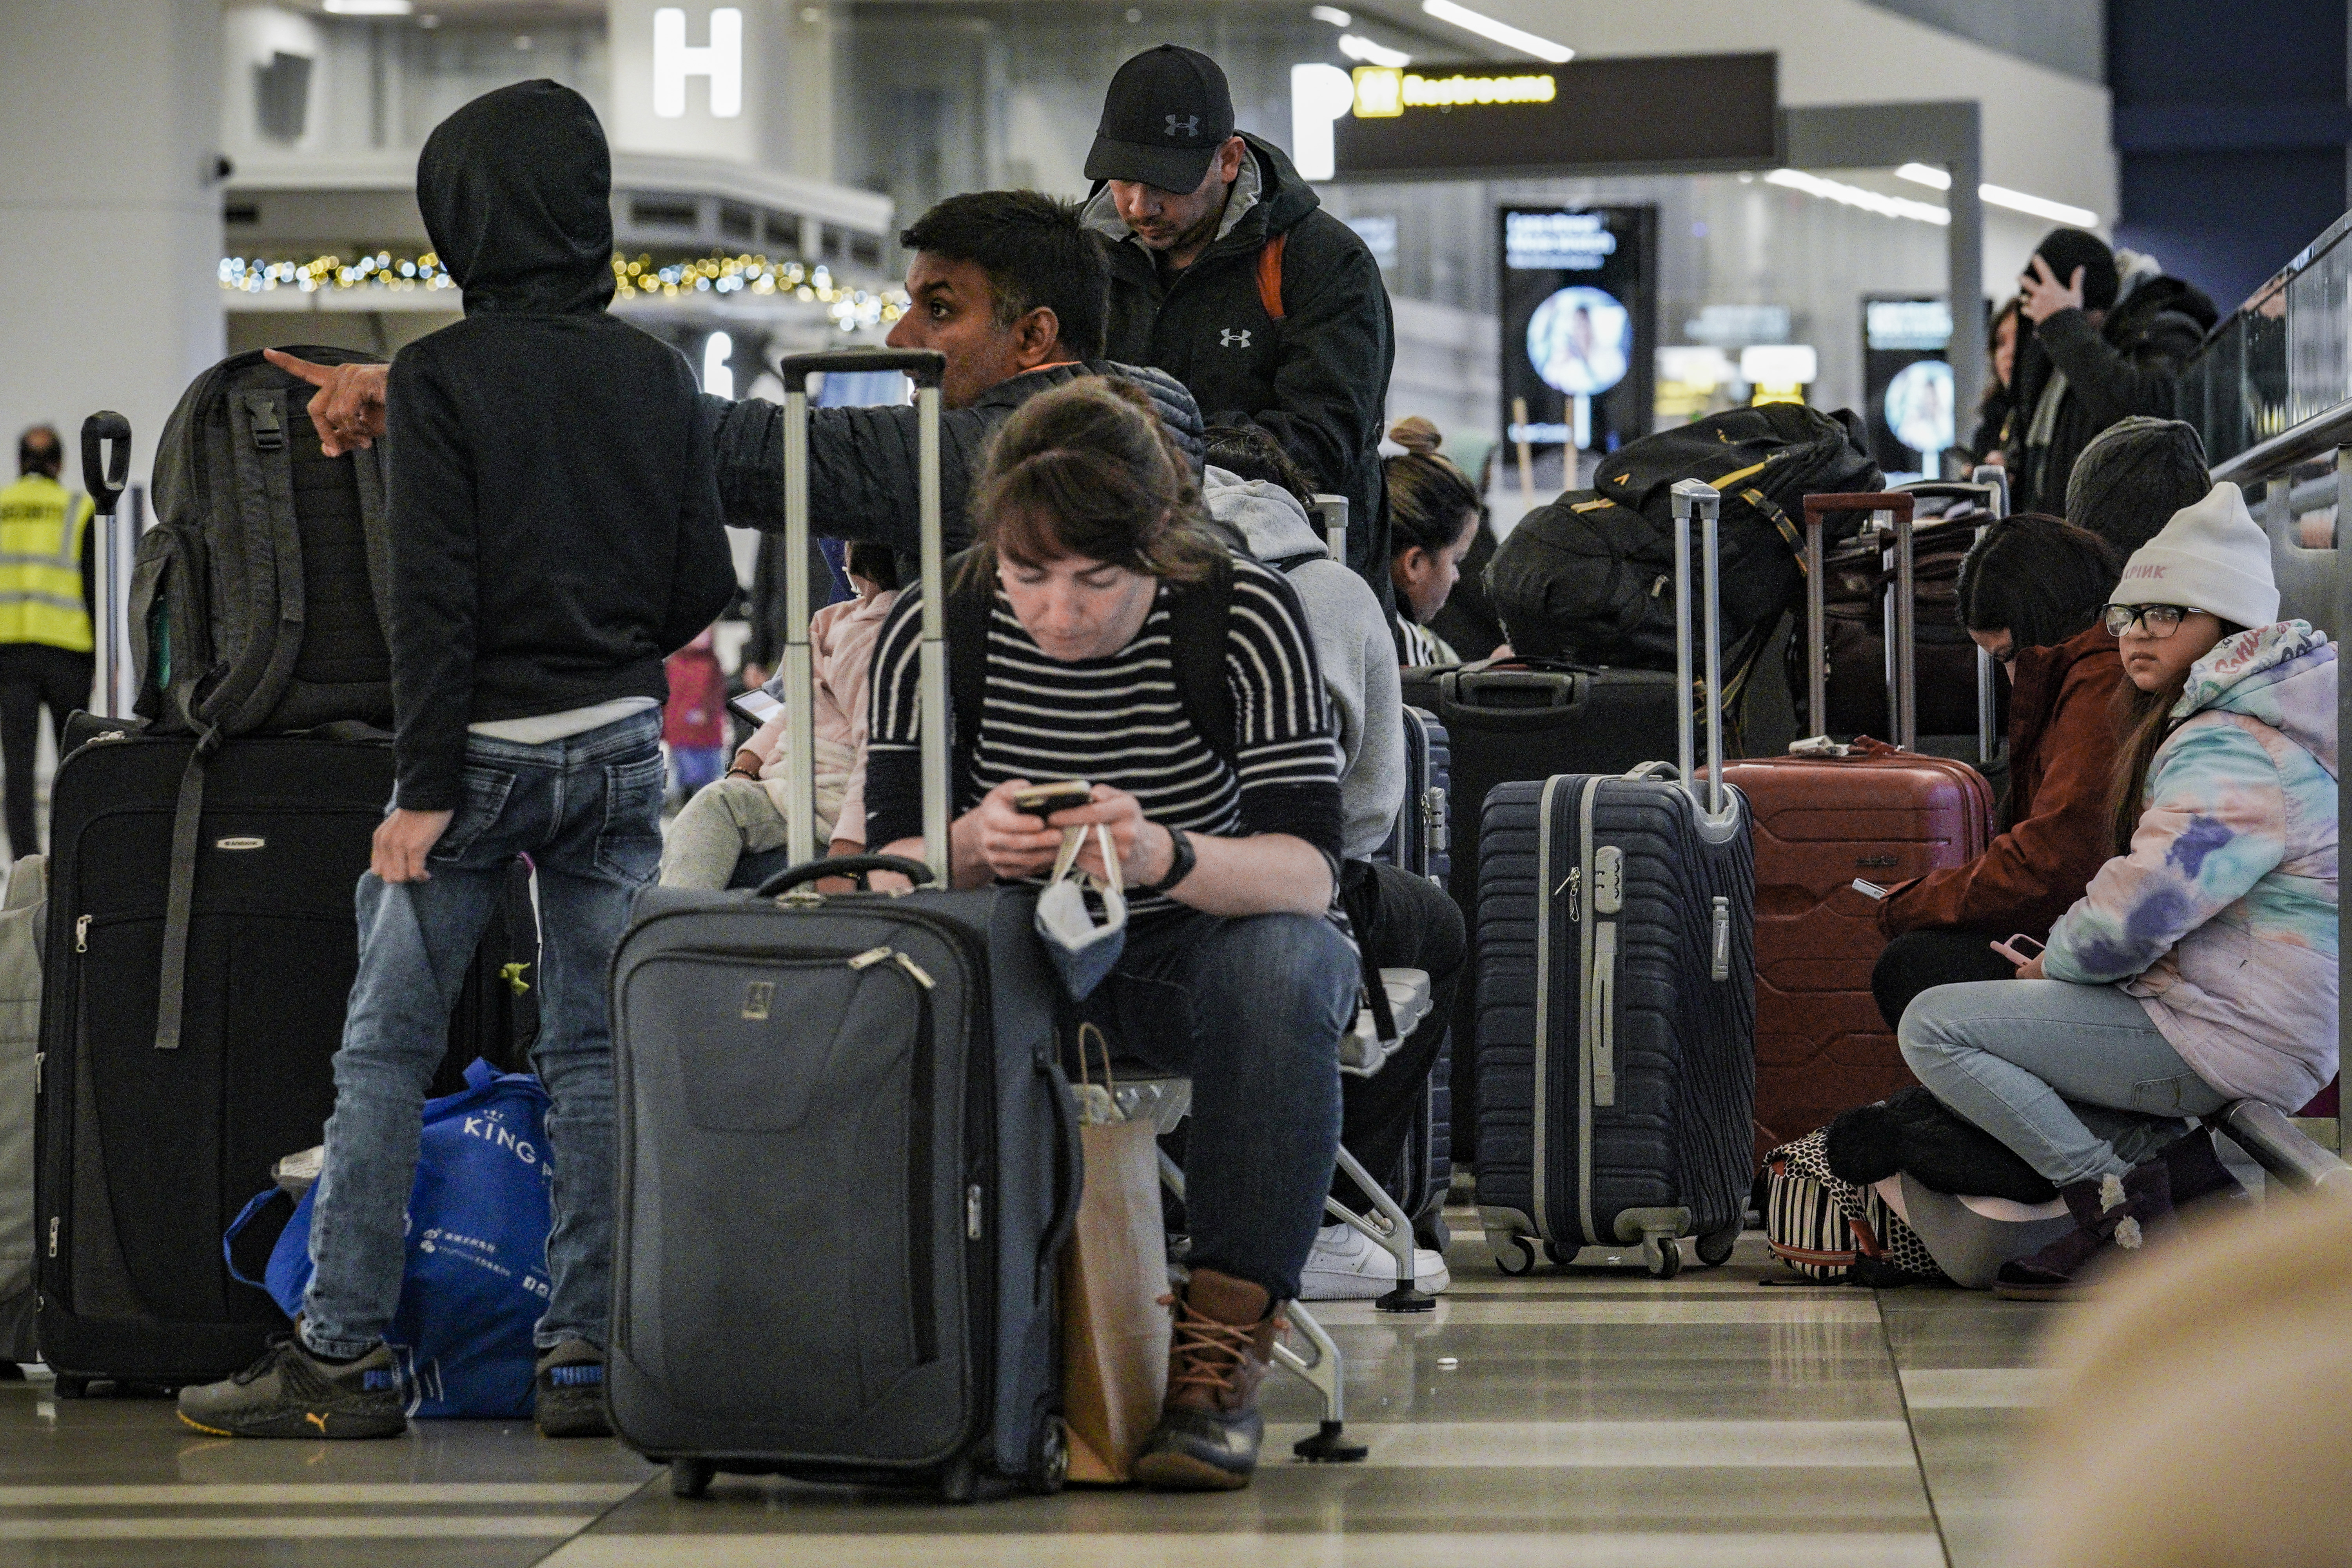 Southwest Airlines passengers sit with their luggage in the check-in area due to delays and cancellations at Laguardia Airport in New York (AP Photo/Bebeto Matthews)